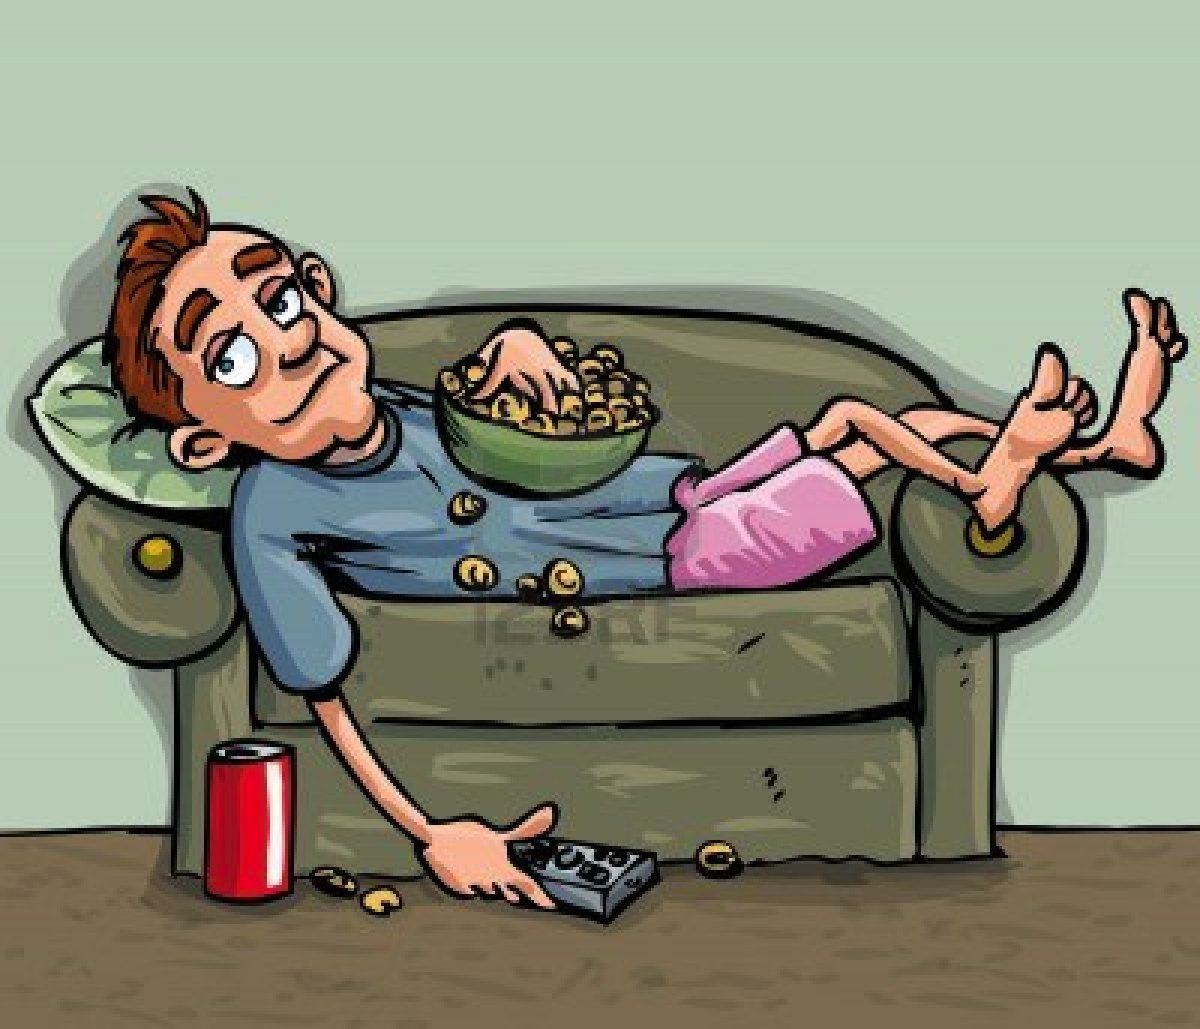 9155015-cartoon-teen-relaxing-on-the-sofa-he-is-eating-a-snack-and-has-a-soft-drink-handy.1